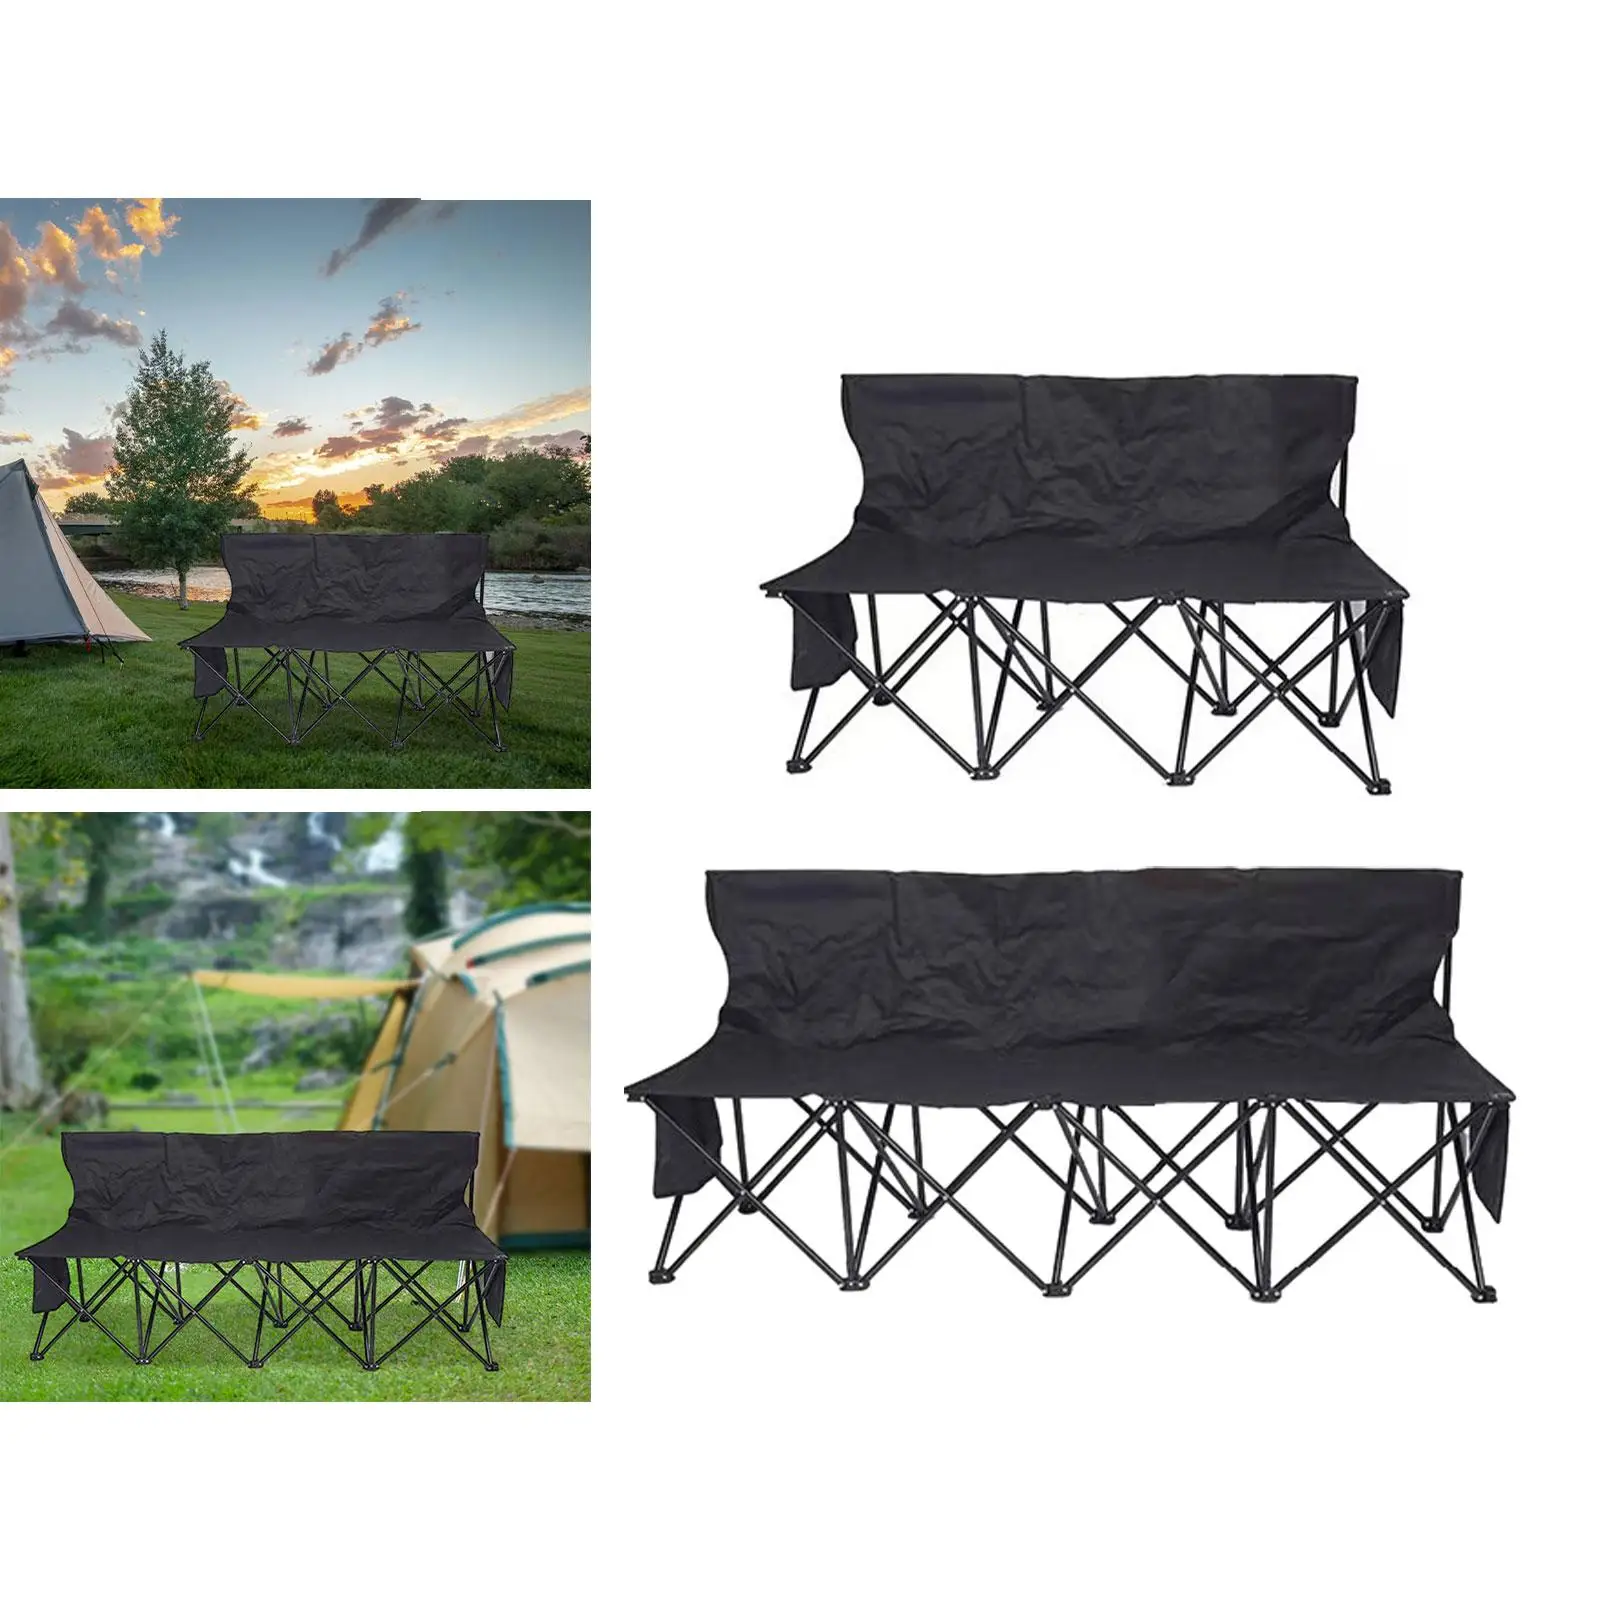 Folding Bench Folding Camping Chair Lightweight Multi Person Portable Sideline